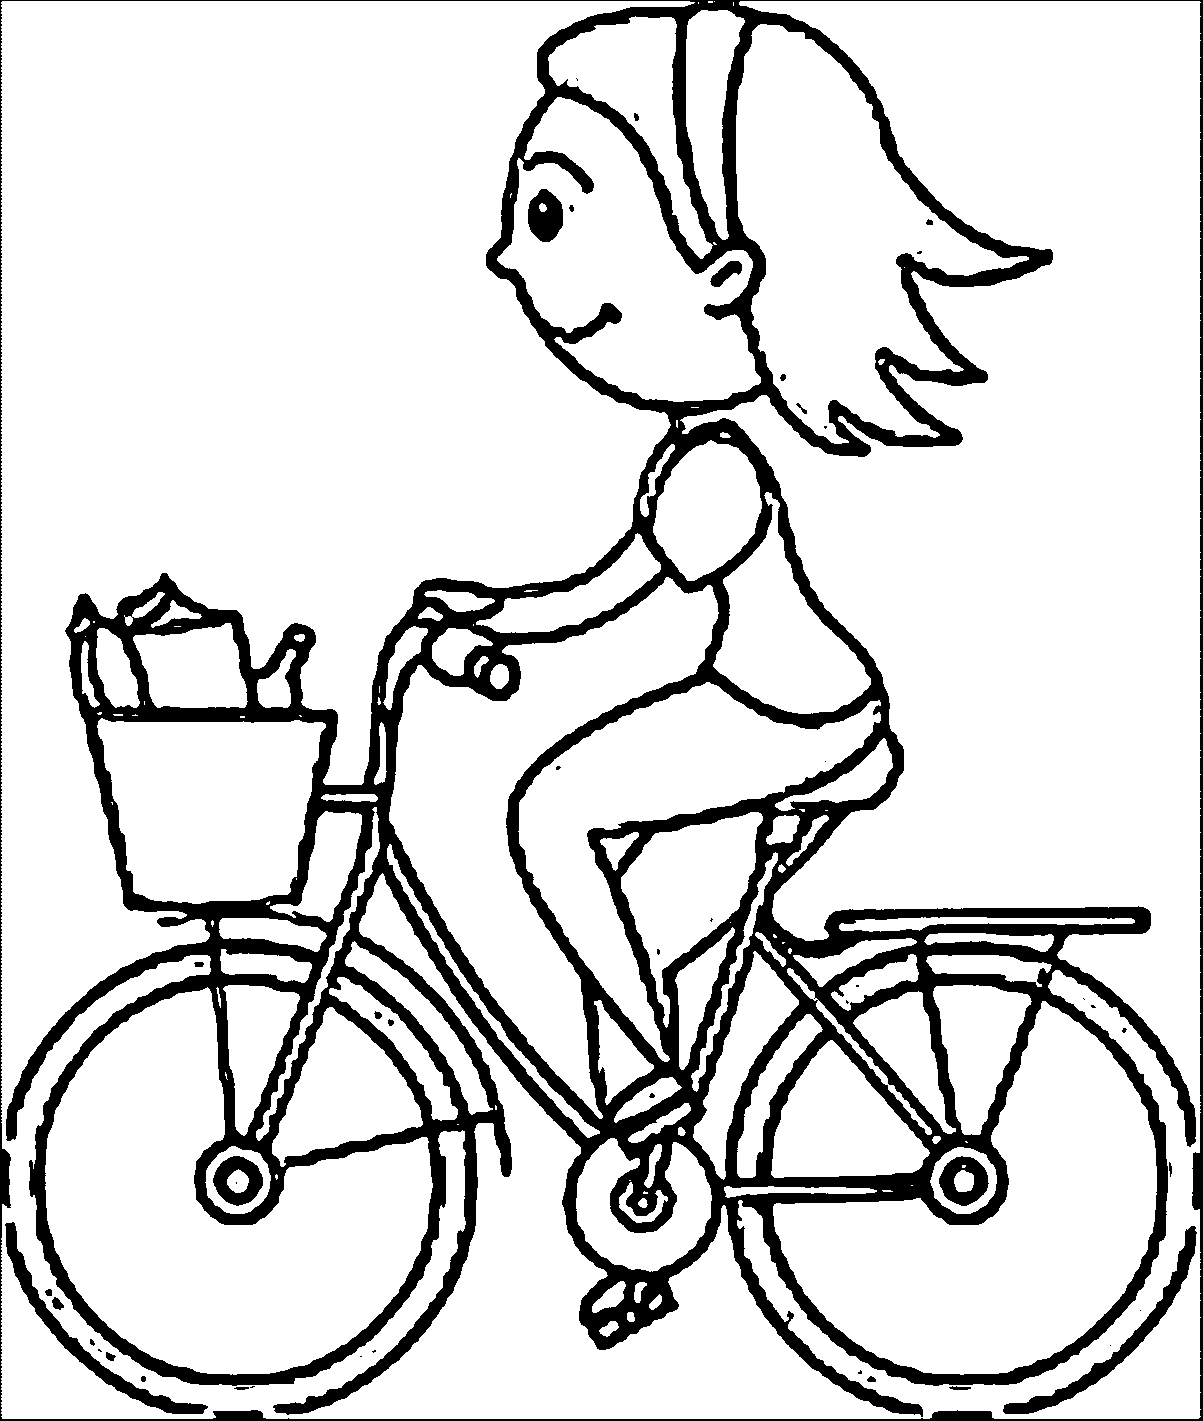 Riding Bicycle With Full Basket Coloring Page | Wecoloringpage